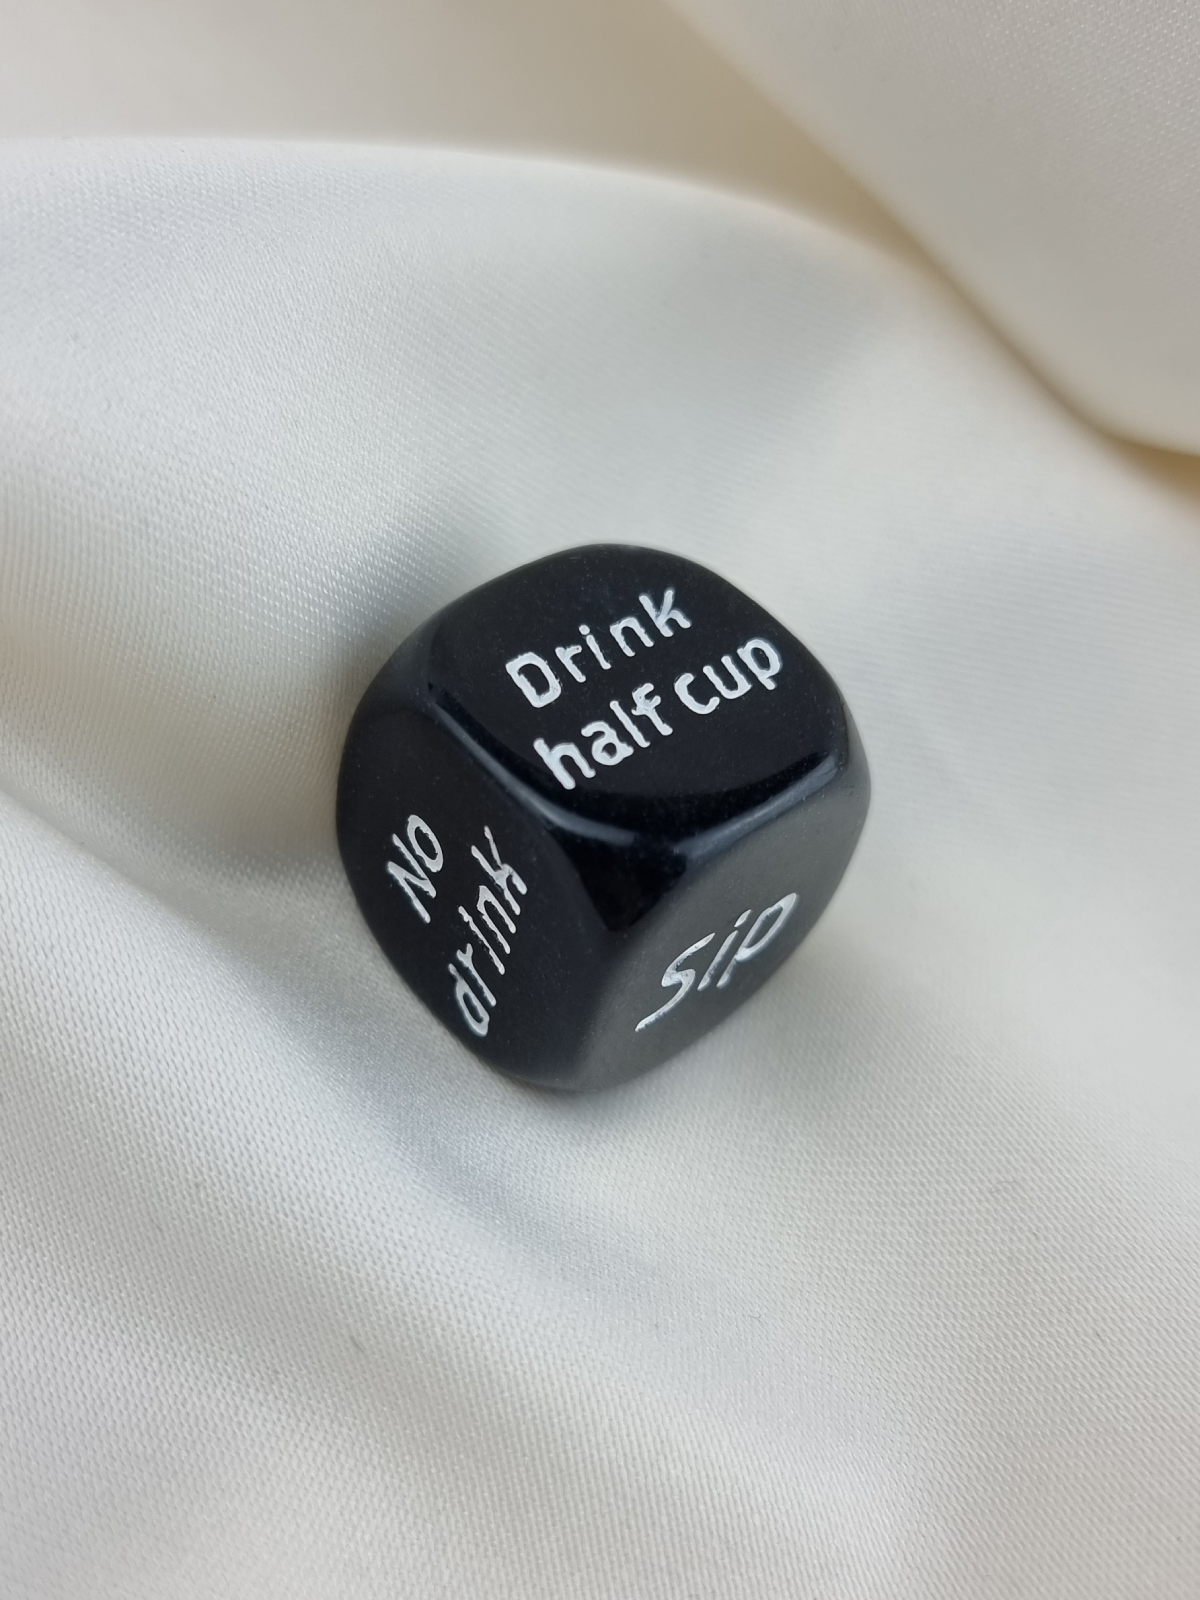 Drinking game dice